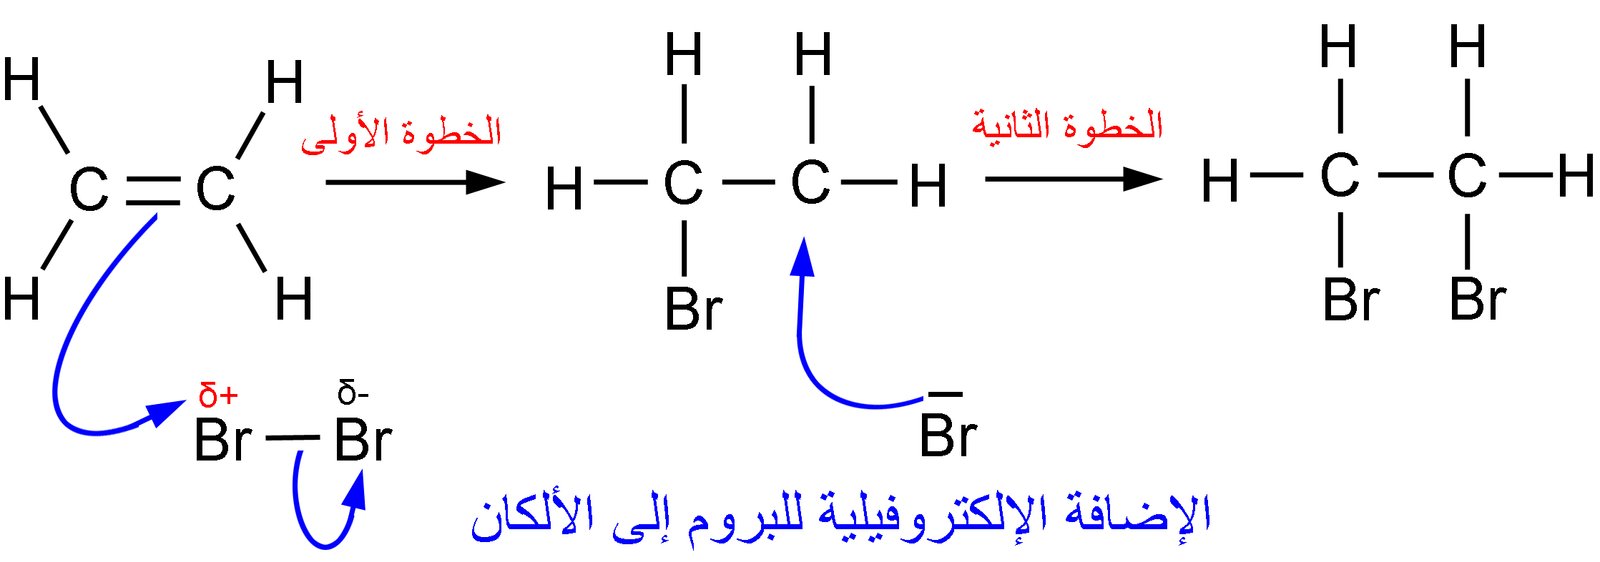 electrophilic addition bromine